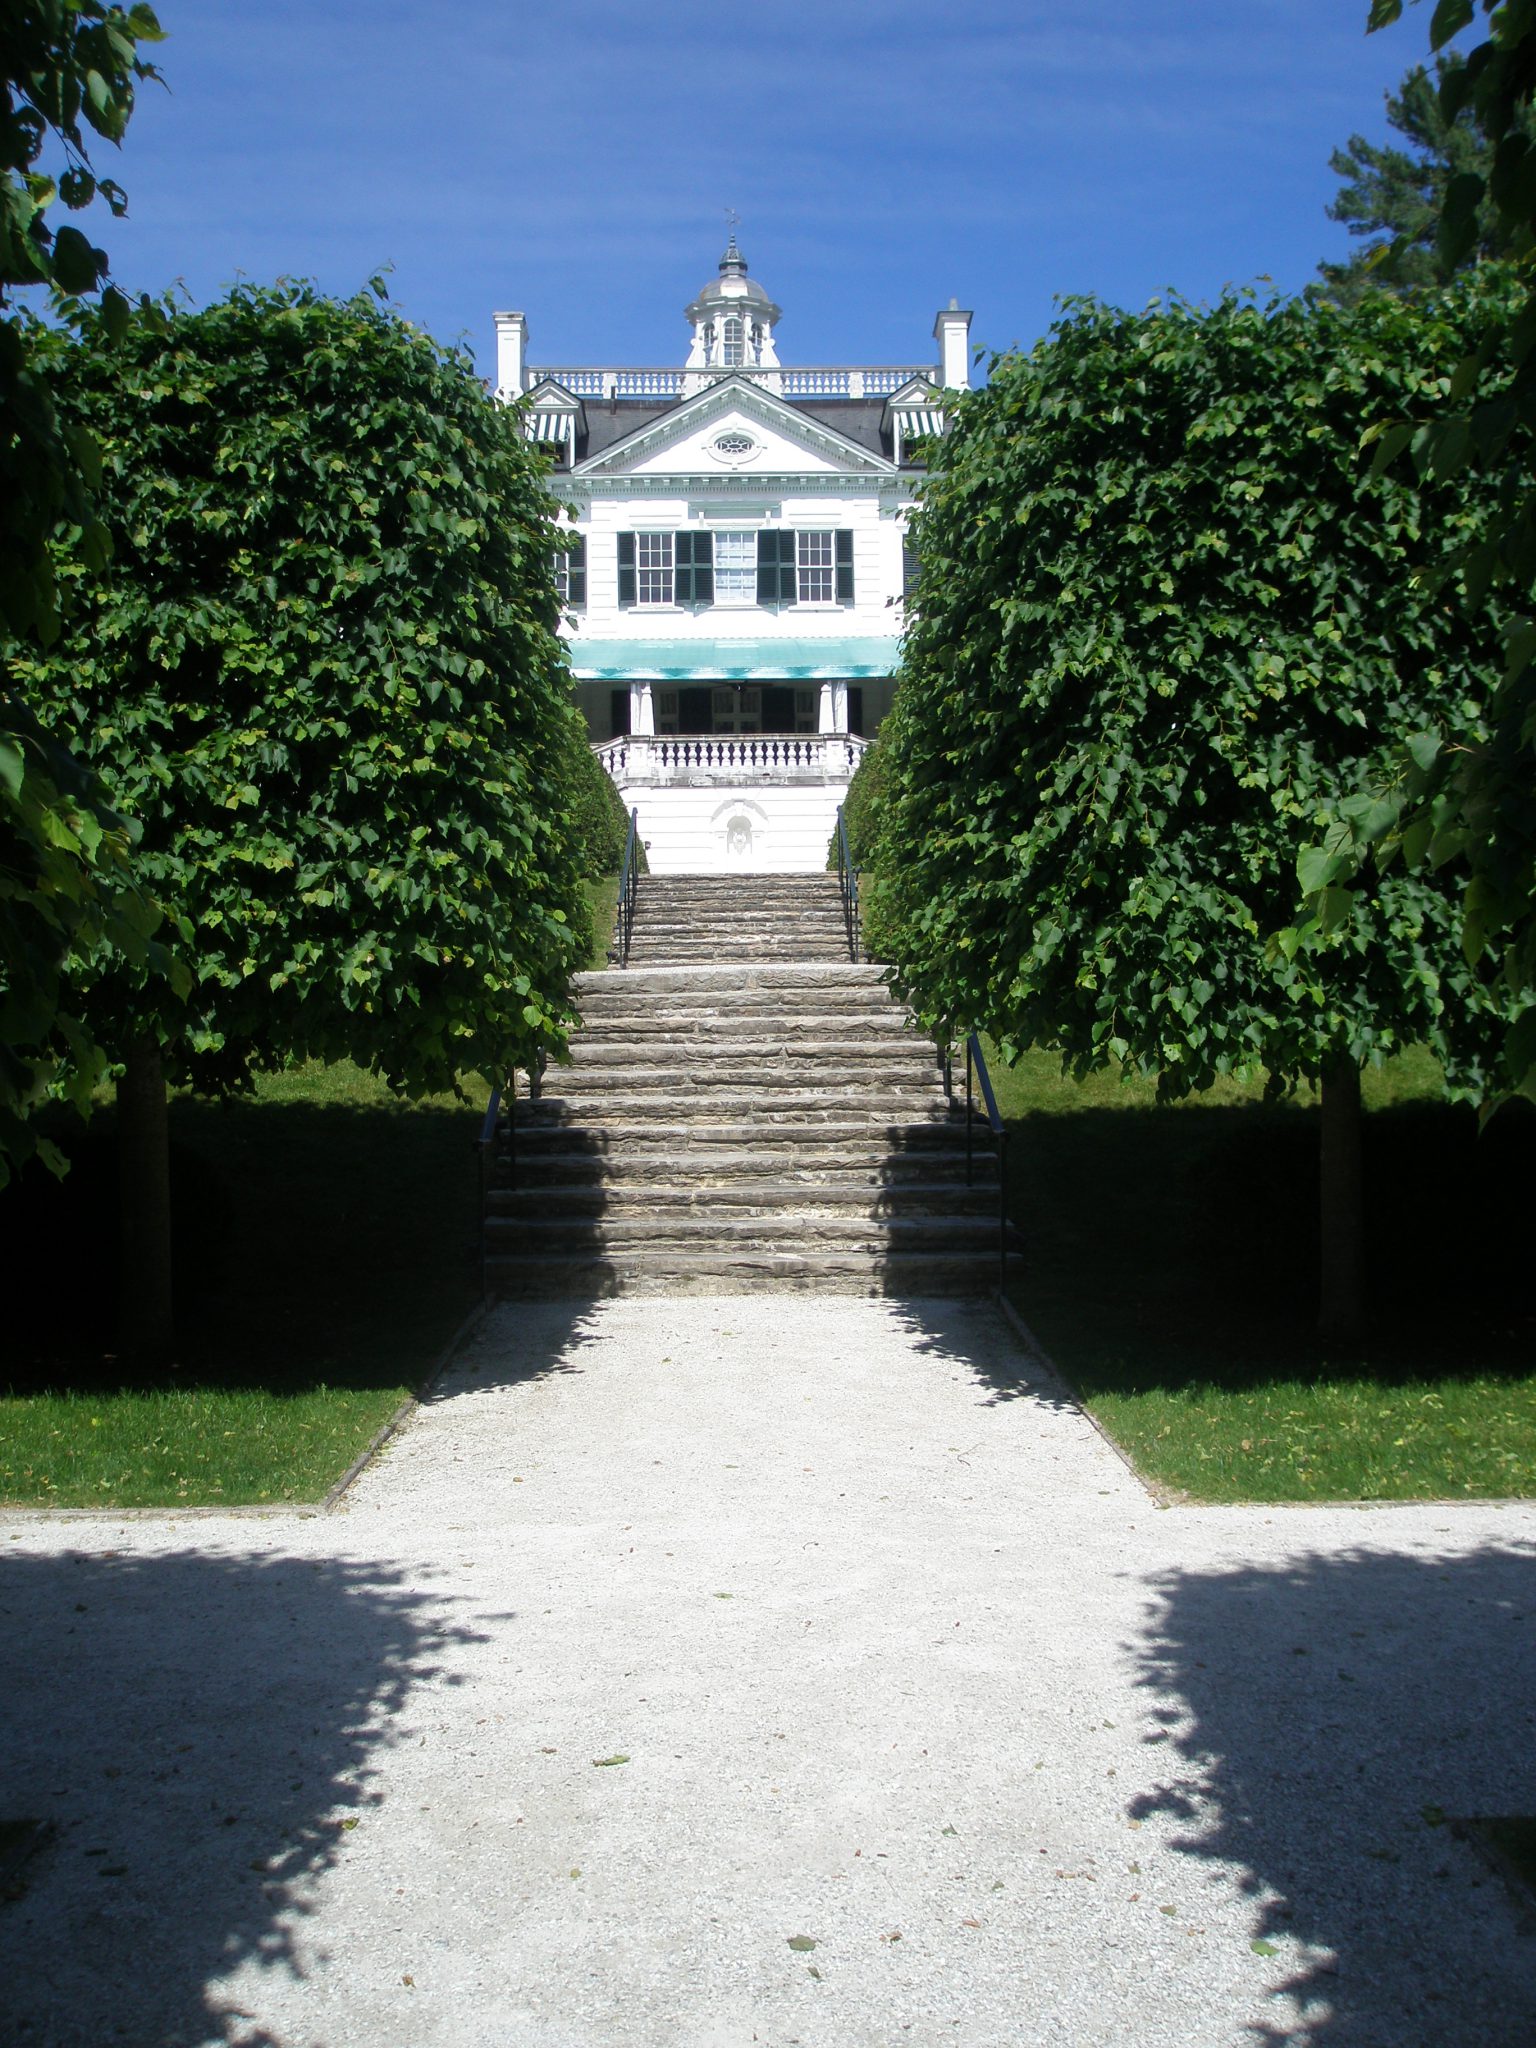 Stairs at mid-point on Lime Walk, which lead up to the Terrace of the Main House